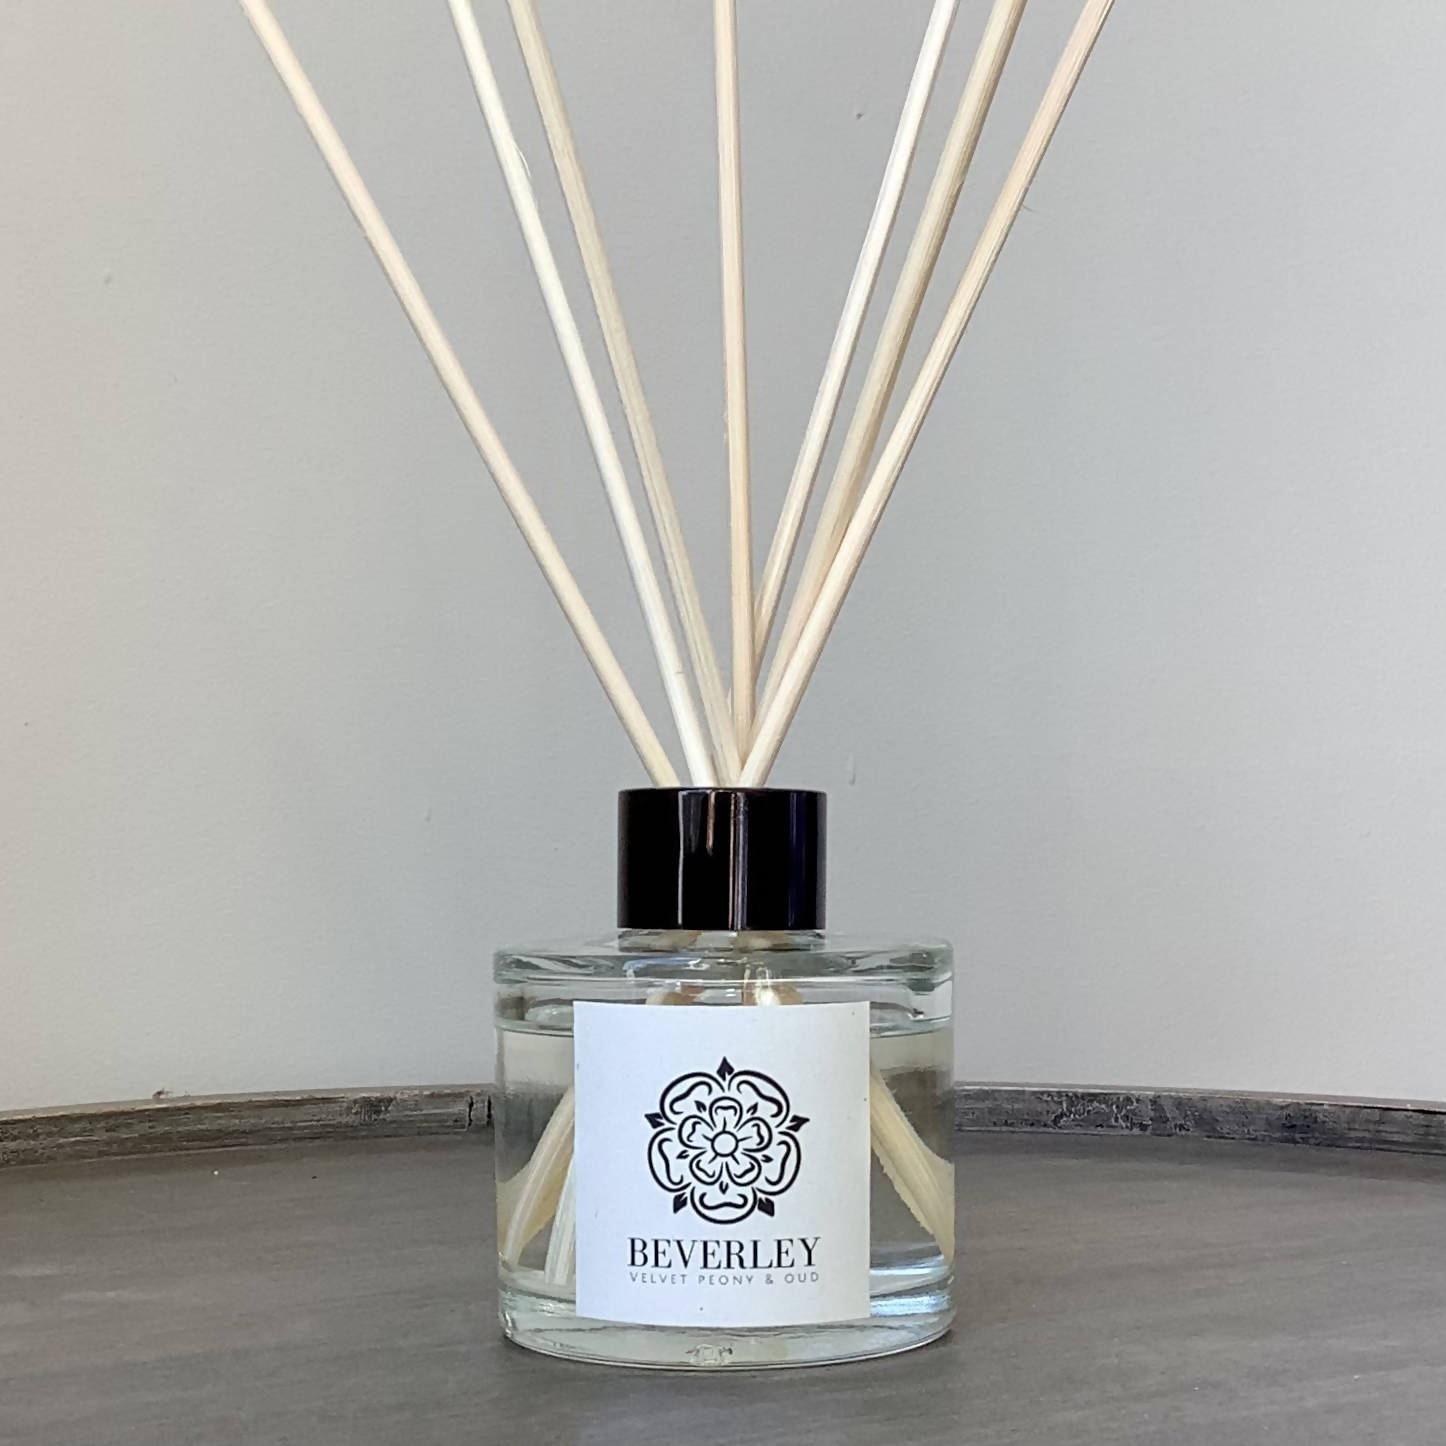 Beverley - Velvet Peony and Oud Reed Diffuser - 100ml